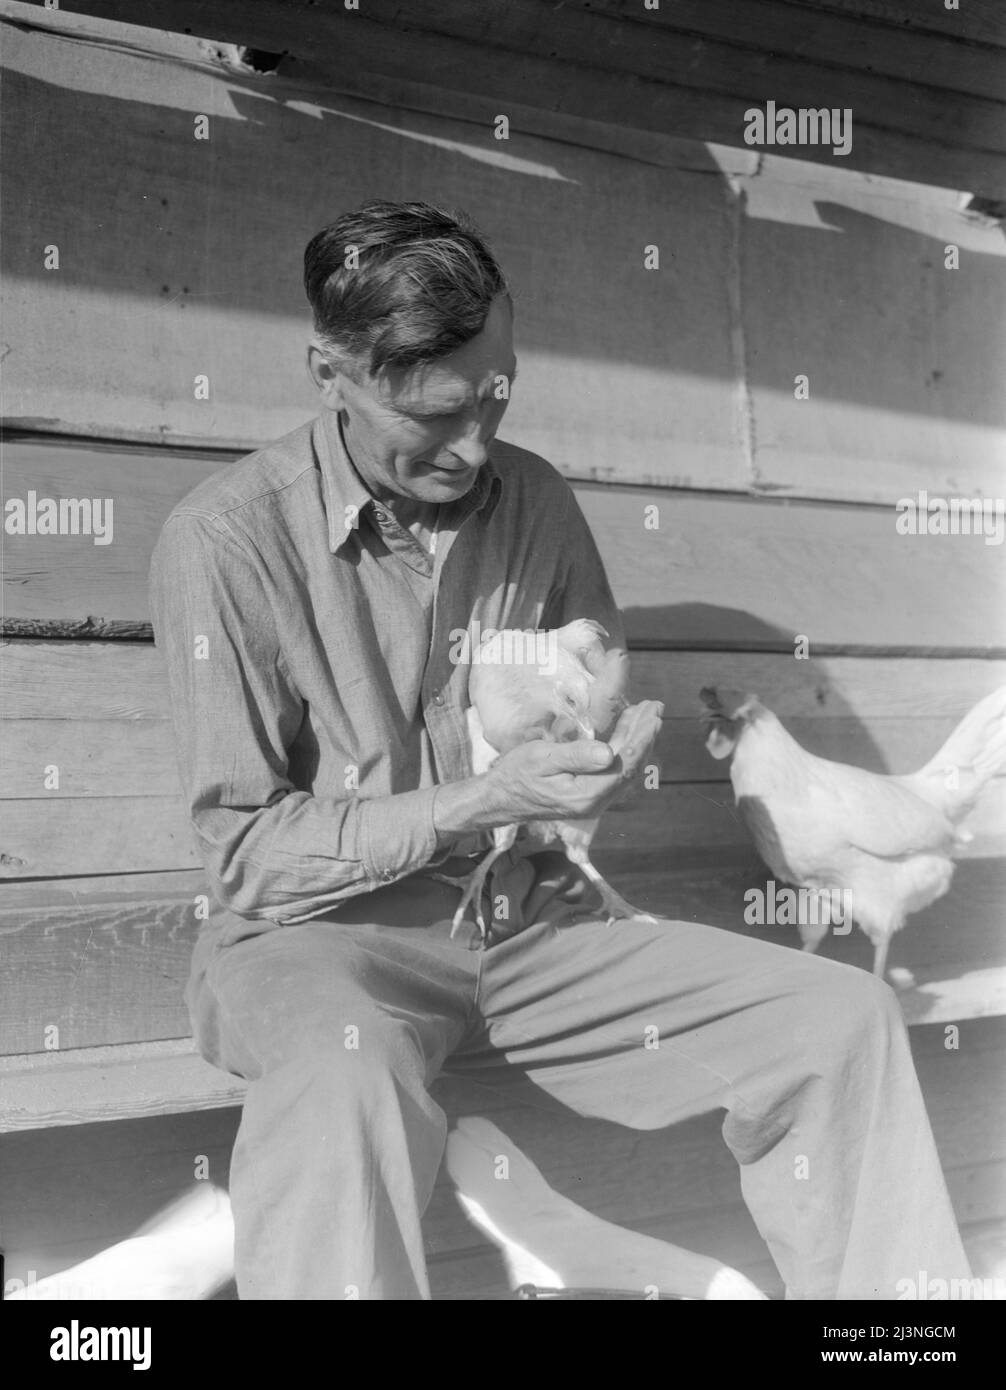 Rural rehabilitation client. San Fernando Valley, California. Chicken farmer making good on rural resettlement loan. Selling case of eggs a day. On state emergency relief administration job before loan. Stock Photo